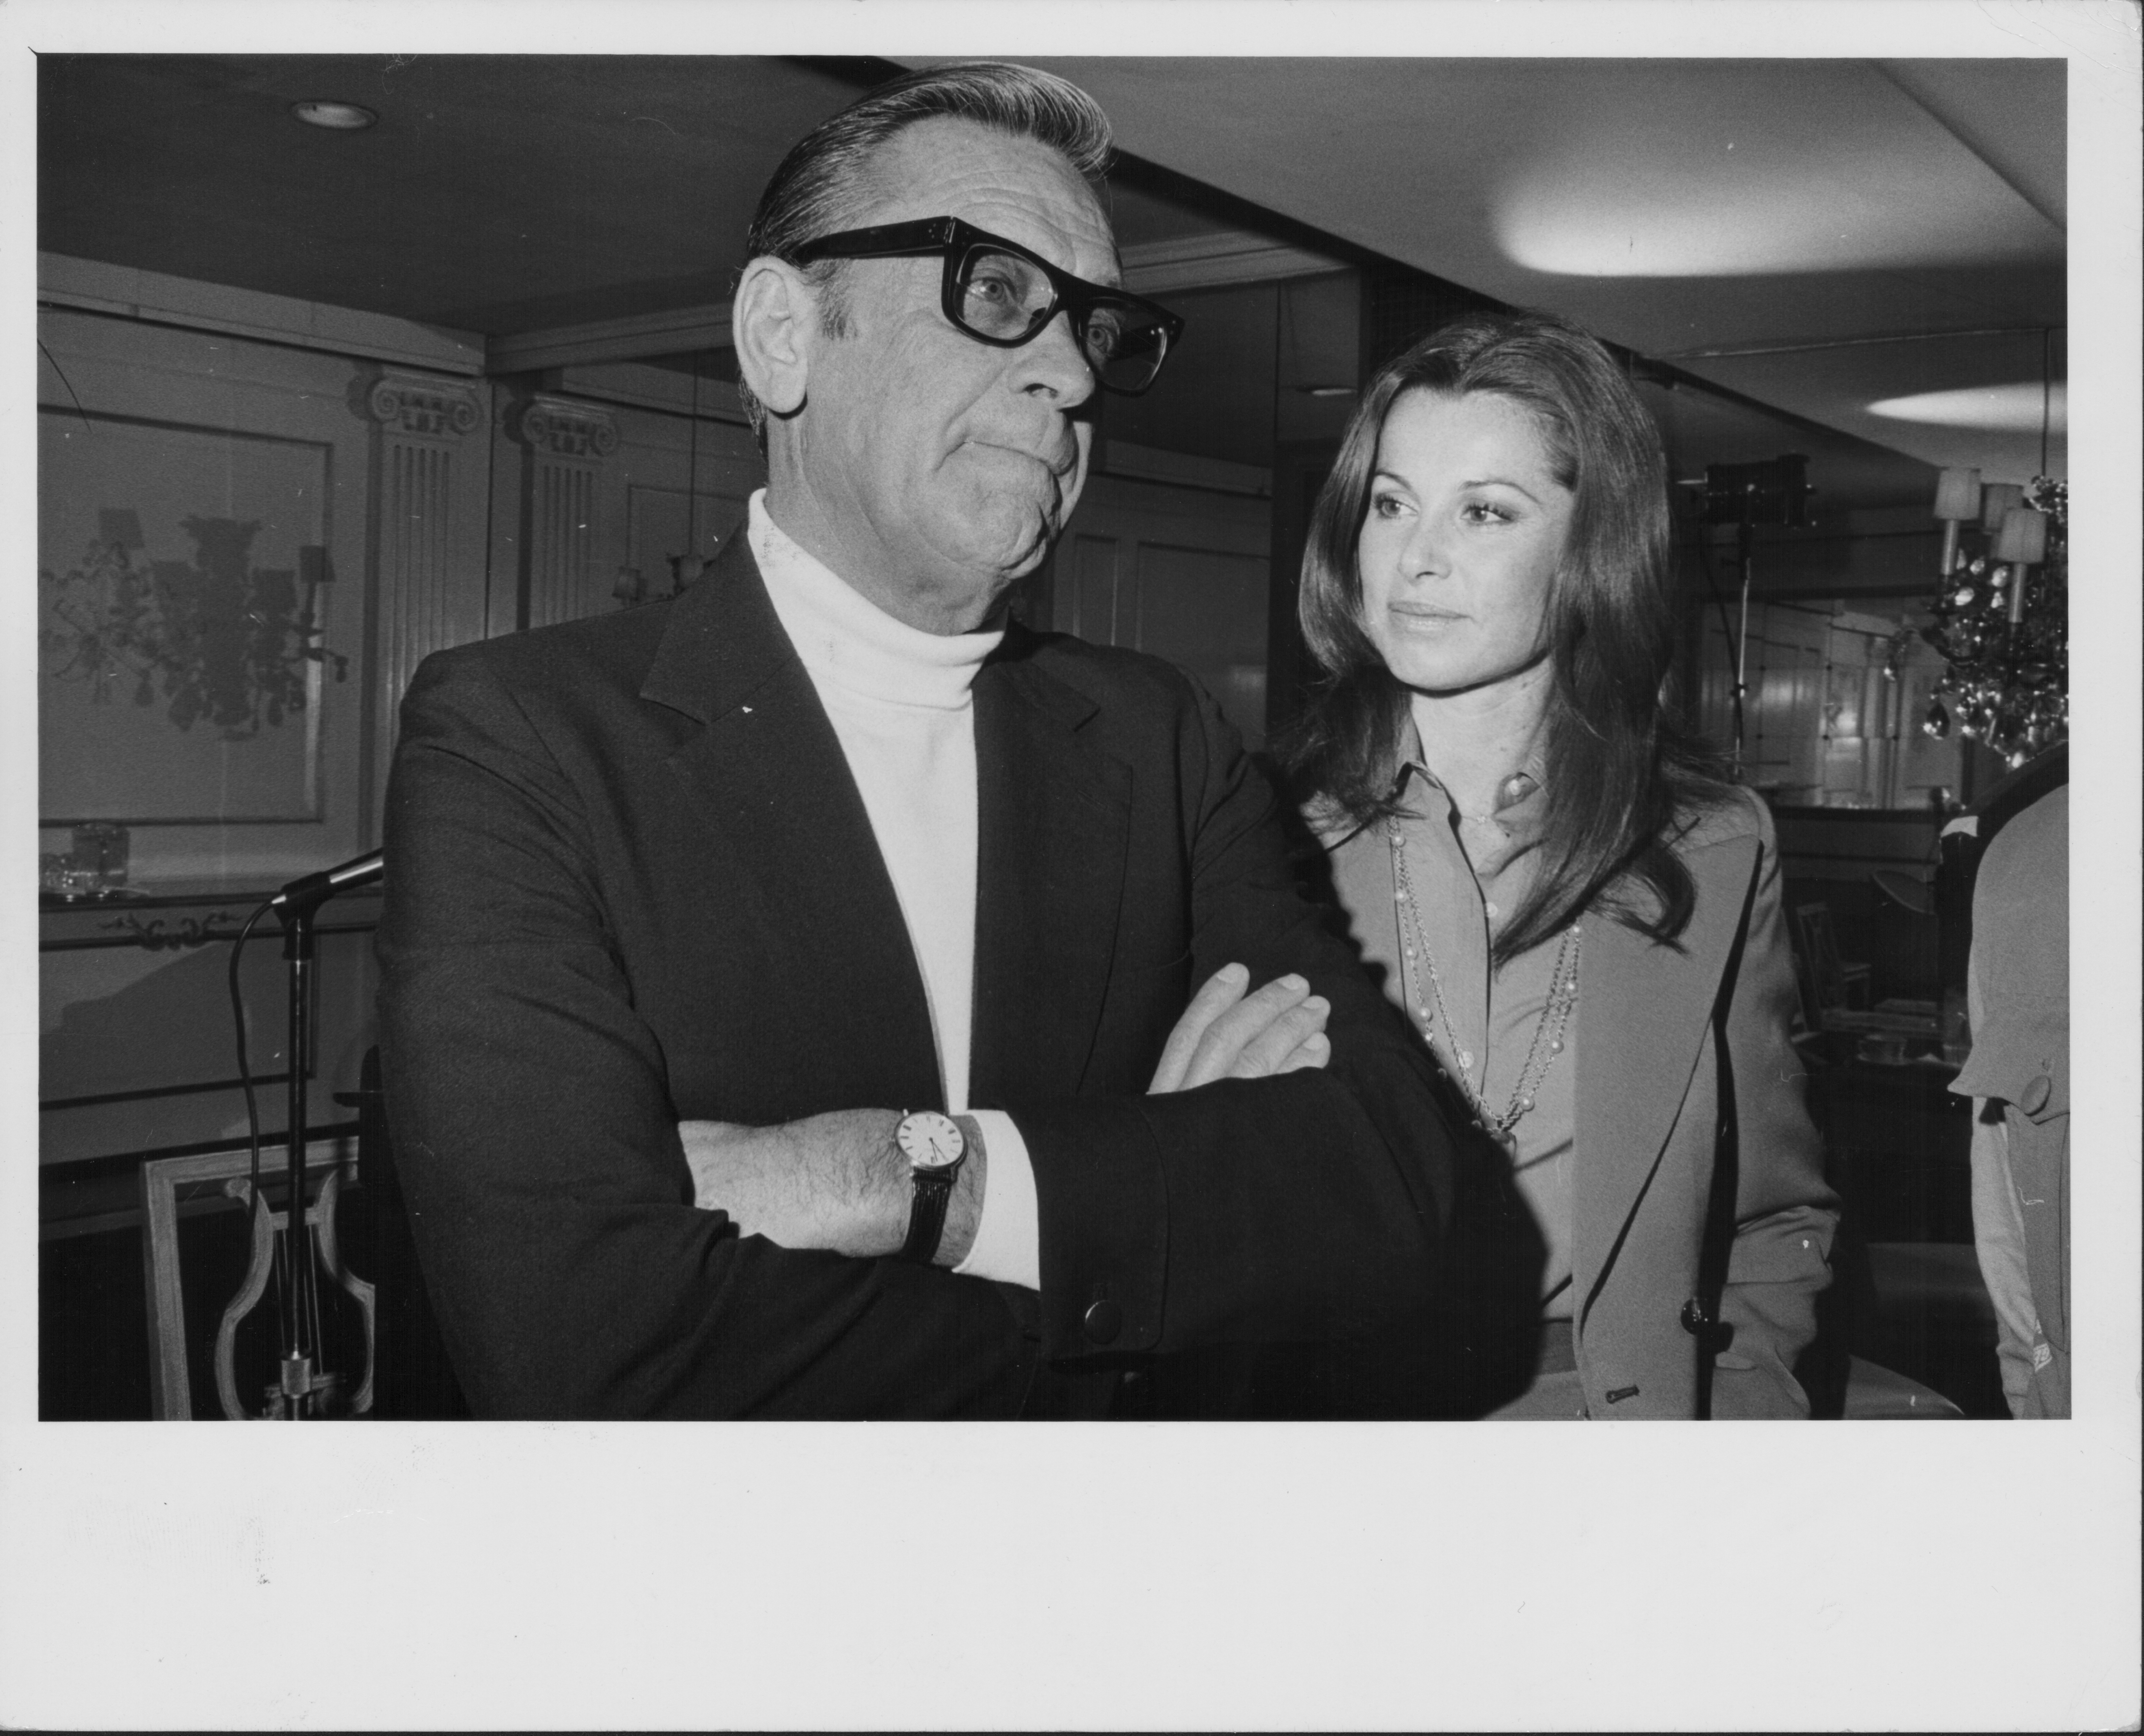 William Holden and Stephanie Powers attend a press conference for the new book "Longing for Darkness," on October 31, 1975 | Source: Getty Images